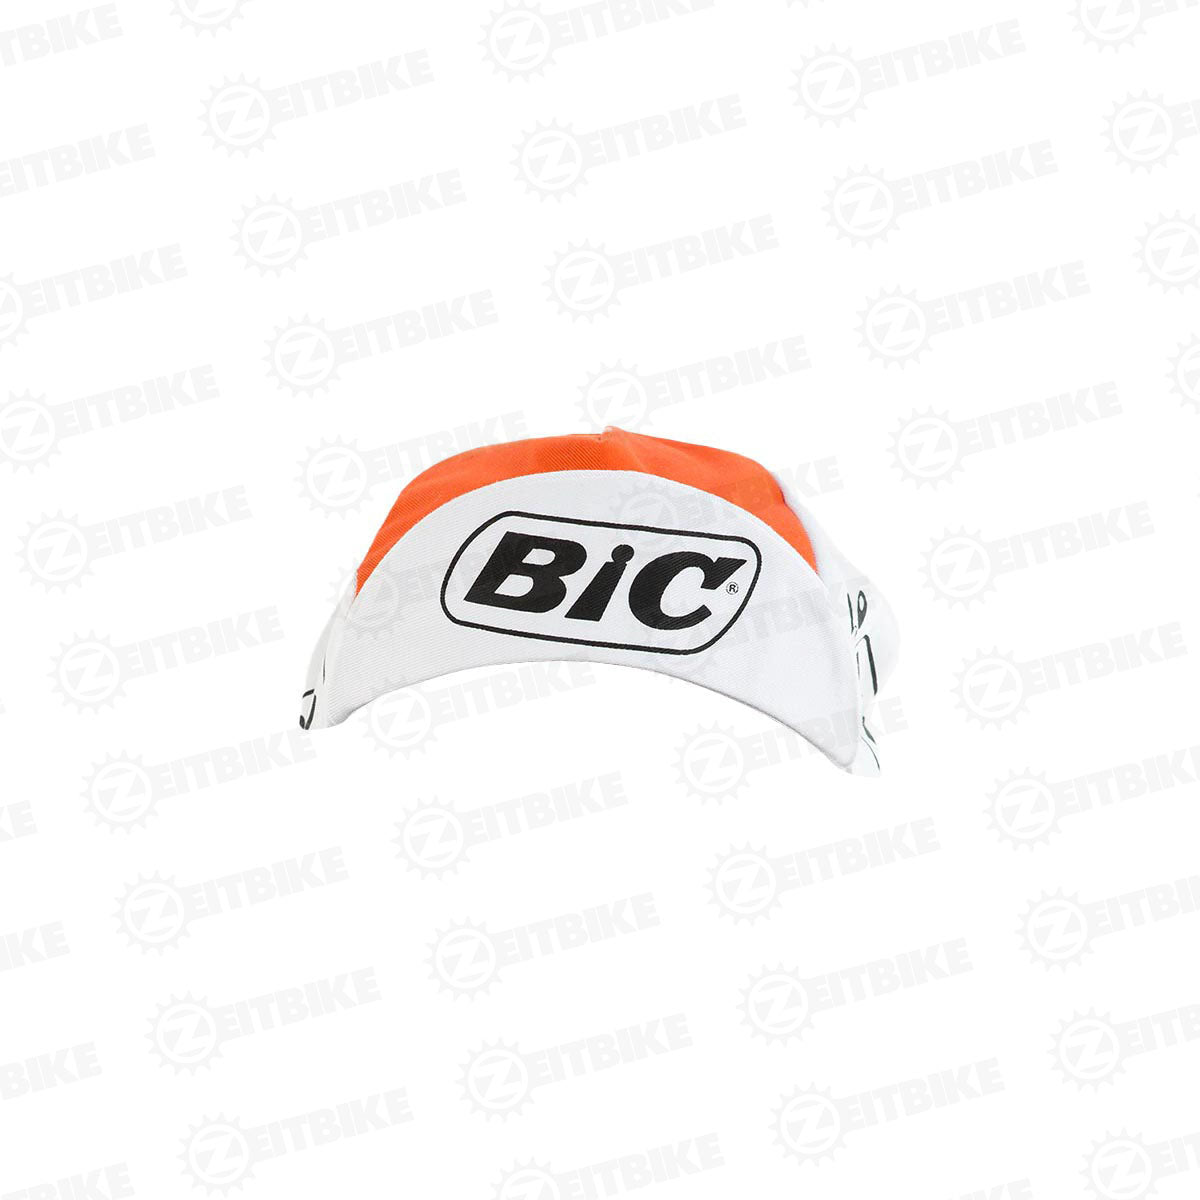 ZEITBIKE - Vintage Cycling Cap - Bic |  | Anti Sweat Caps | for Stand Alone or Under Helmet | Team Jersey Cap Outdoor Cap